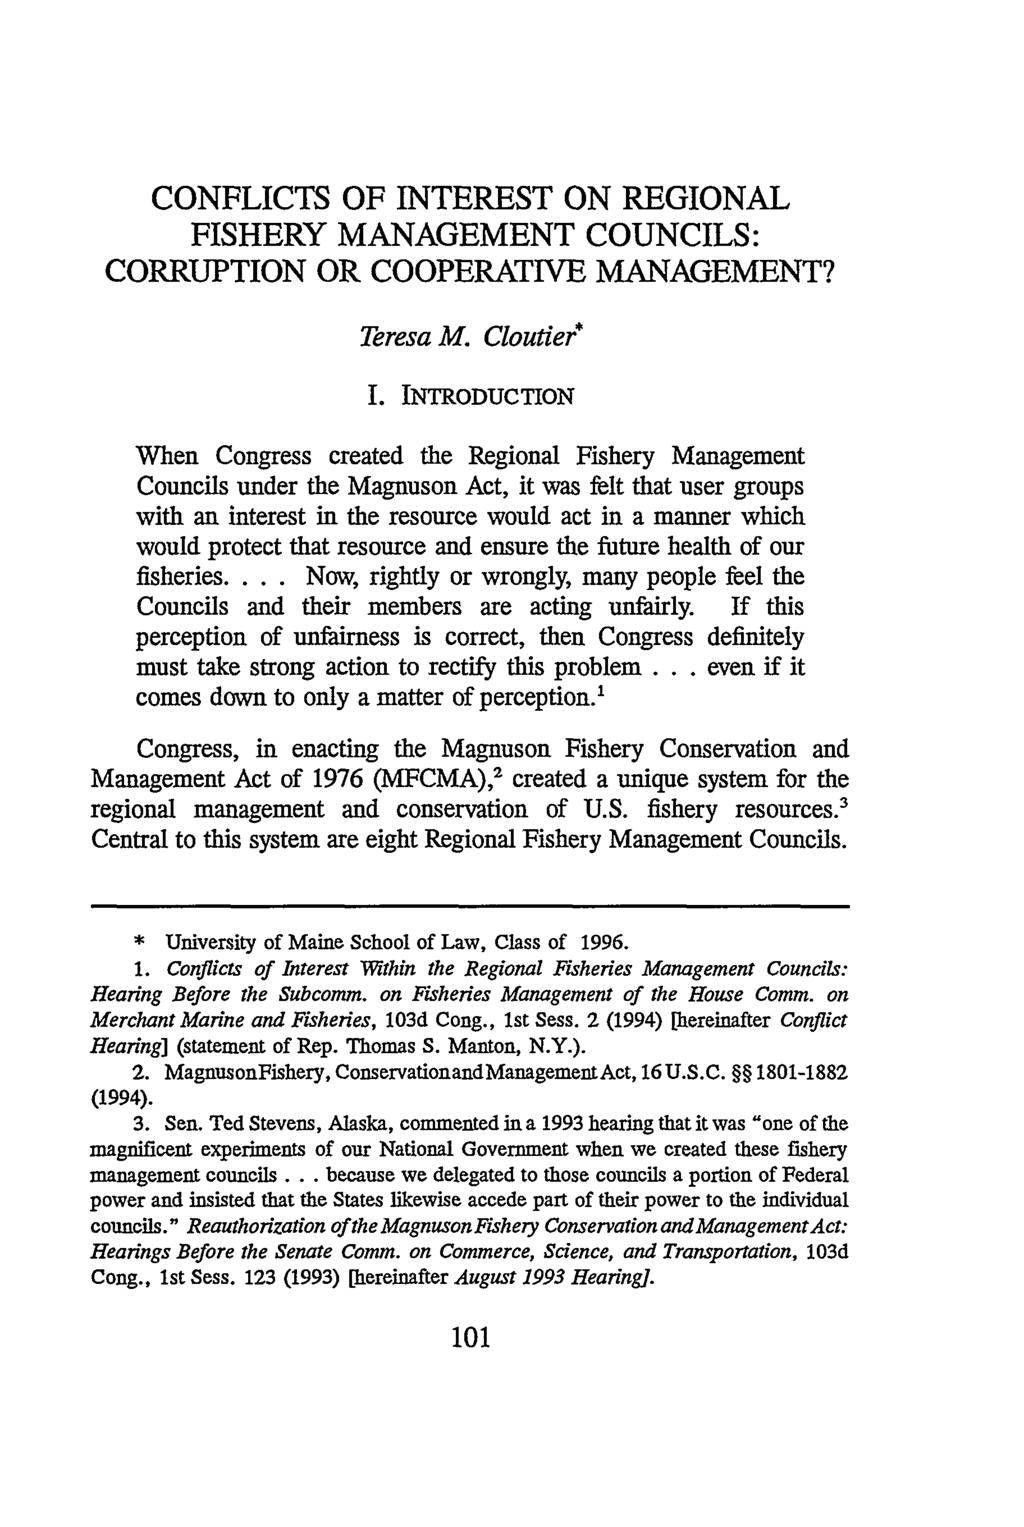 CONFLICTS OF INTEREST ON REGIONAL FISHERY MANAGEMENT COUNCILS: CORRUPTION OR COOPERATIVE MANAGEMENT? Teresa M. Cloutier* I.